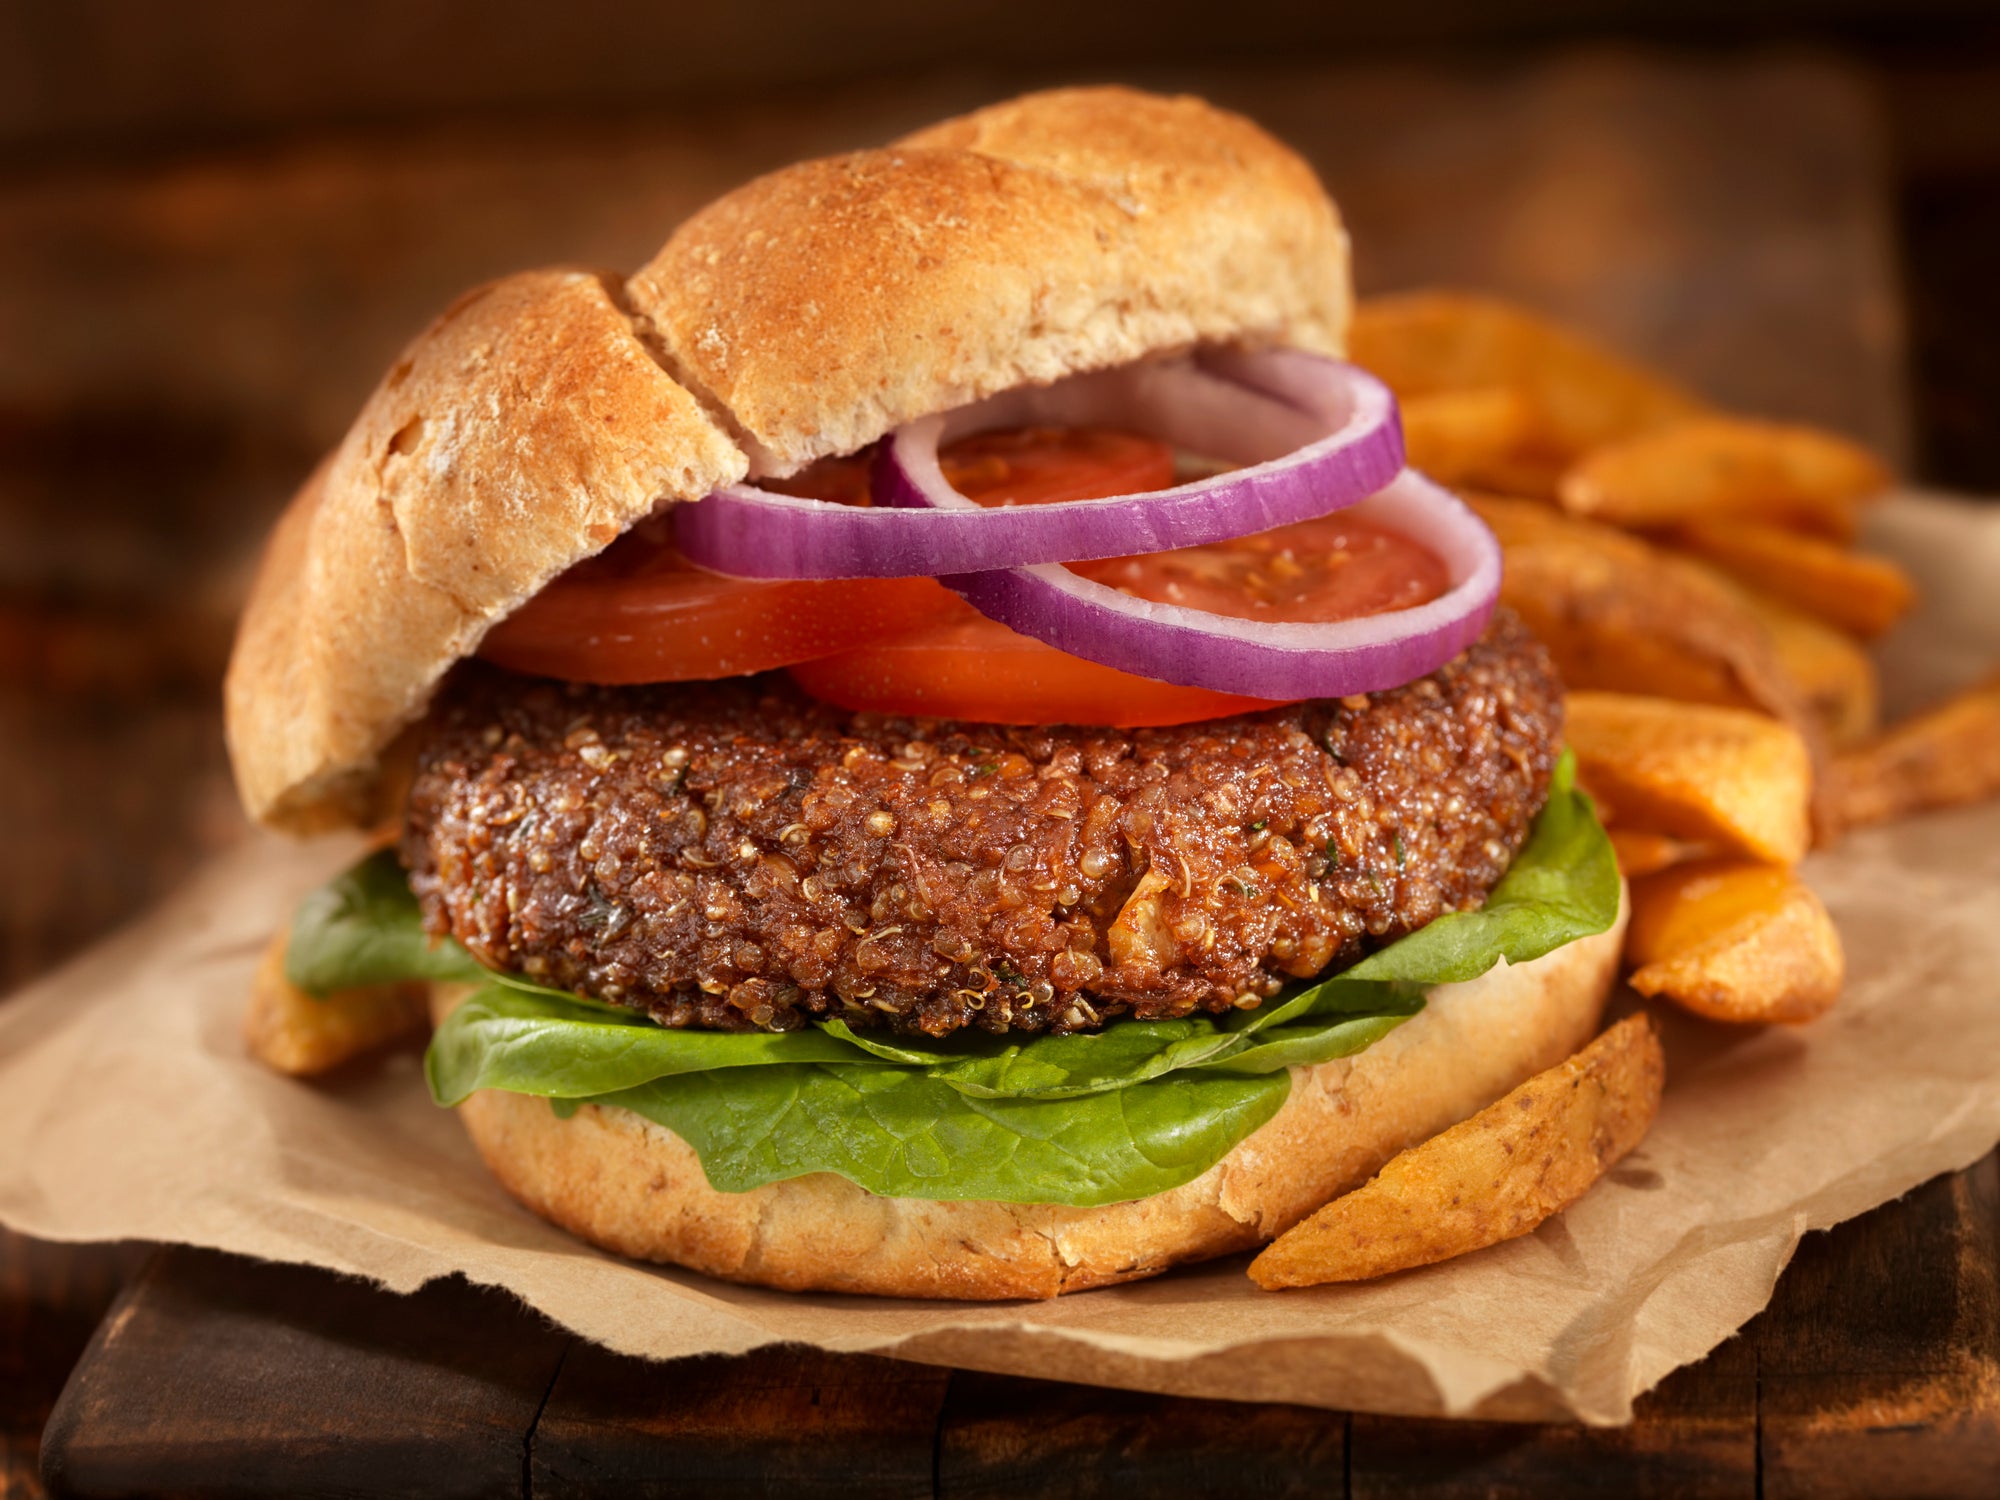 A vegetarian burger made from quinoa, chick peas, rolled outs, onions and garlic